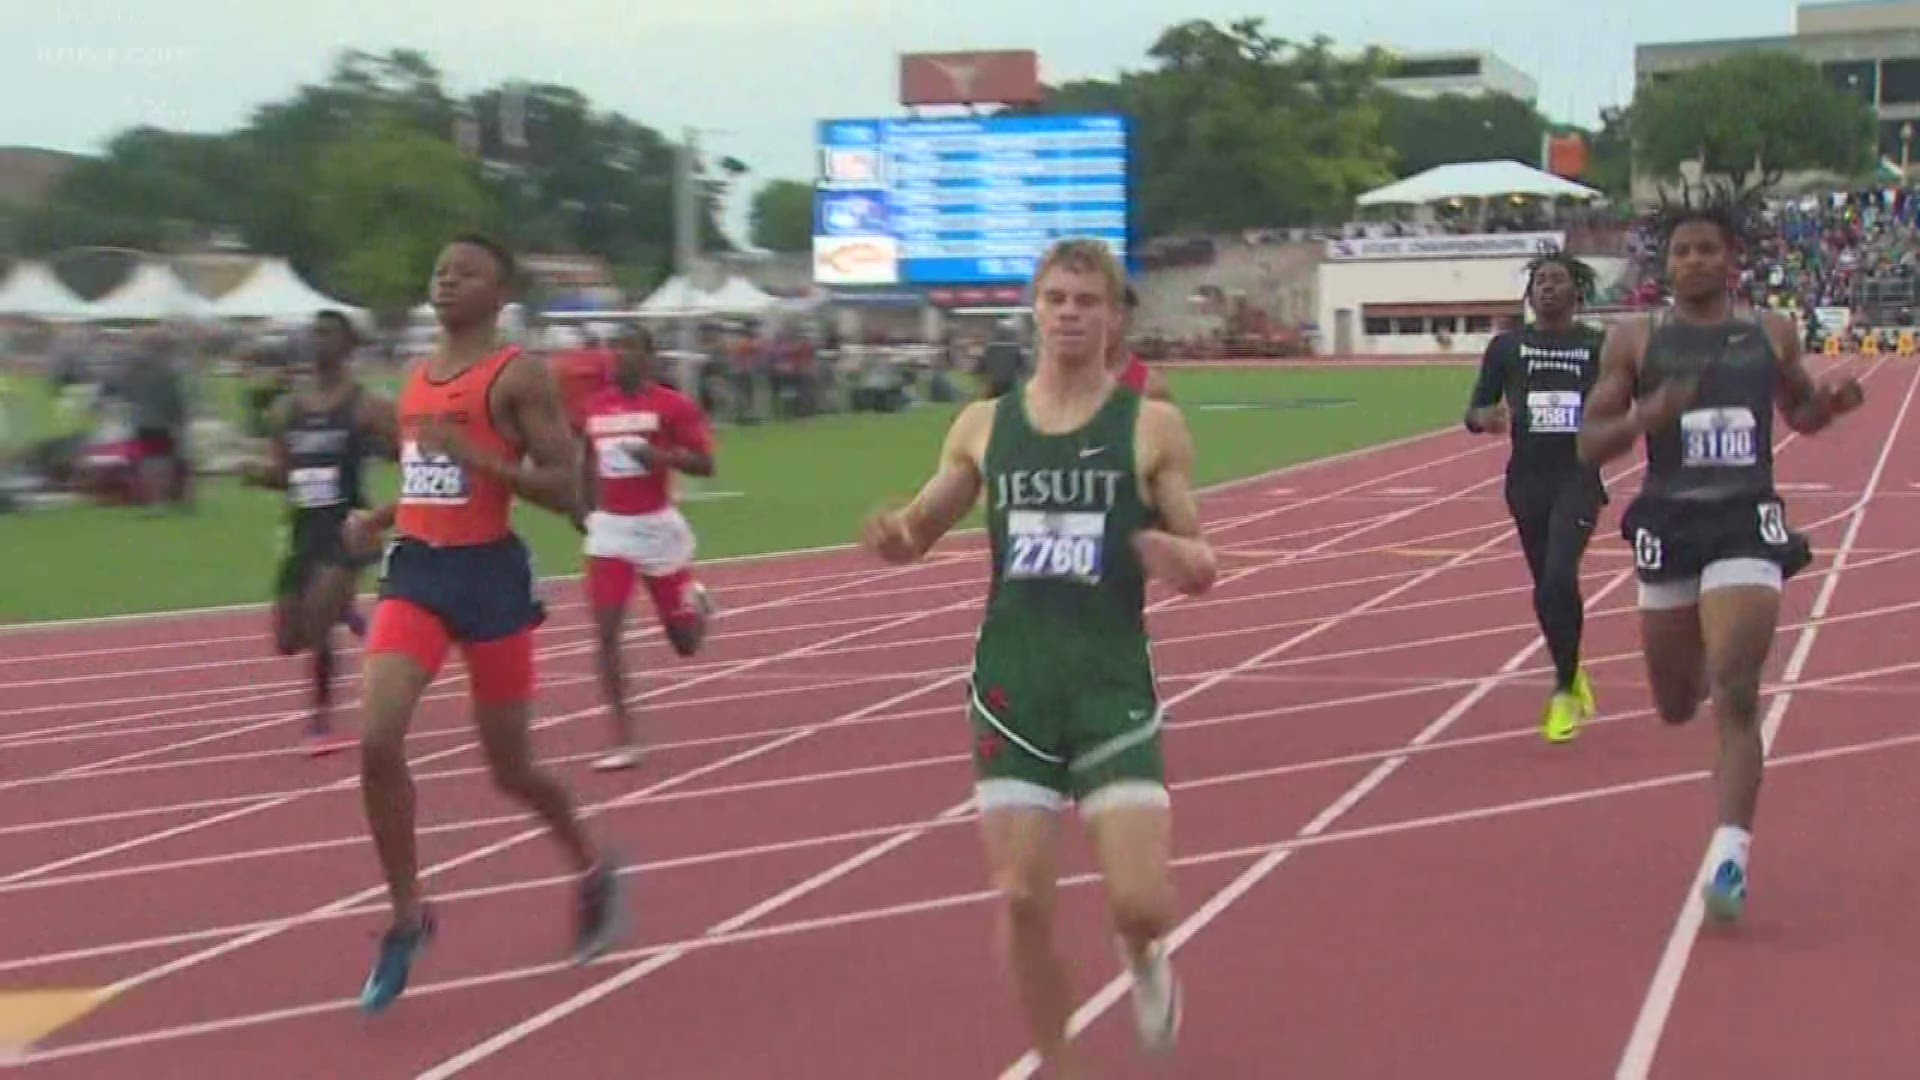 One viewer asked: How does Matthew Boling have the national record when other record books show someone else ran faster in 2014? KHOU 11 Sports' Jason Bristol answers.